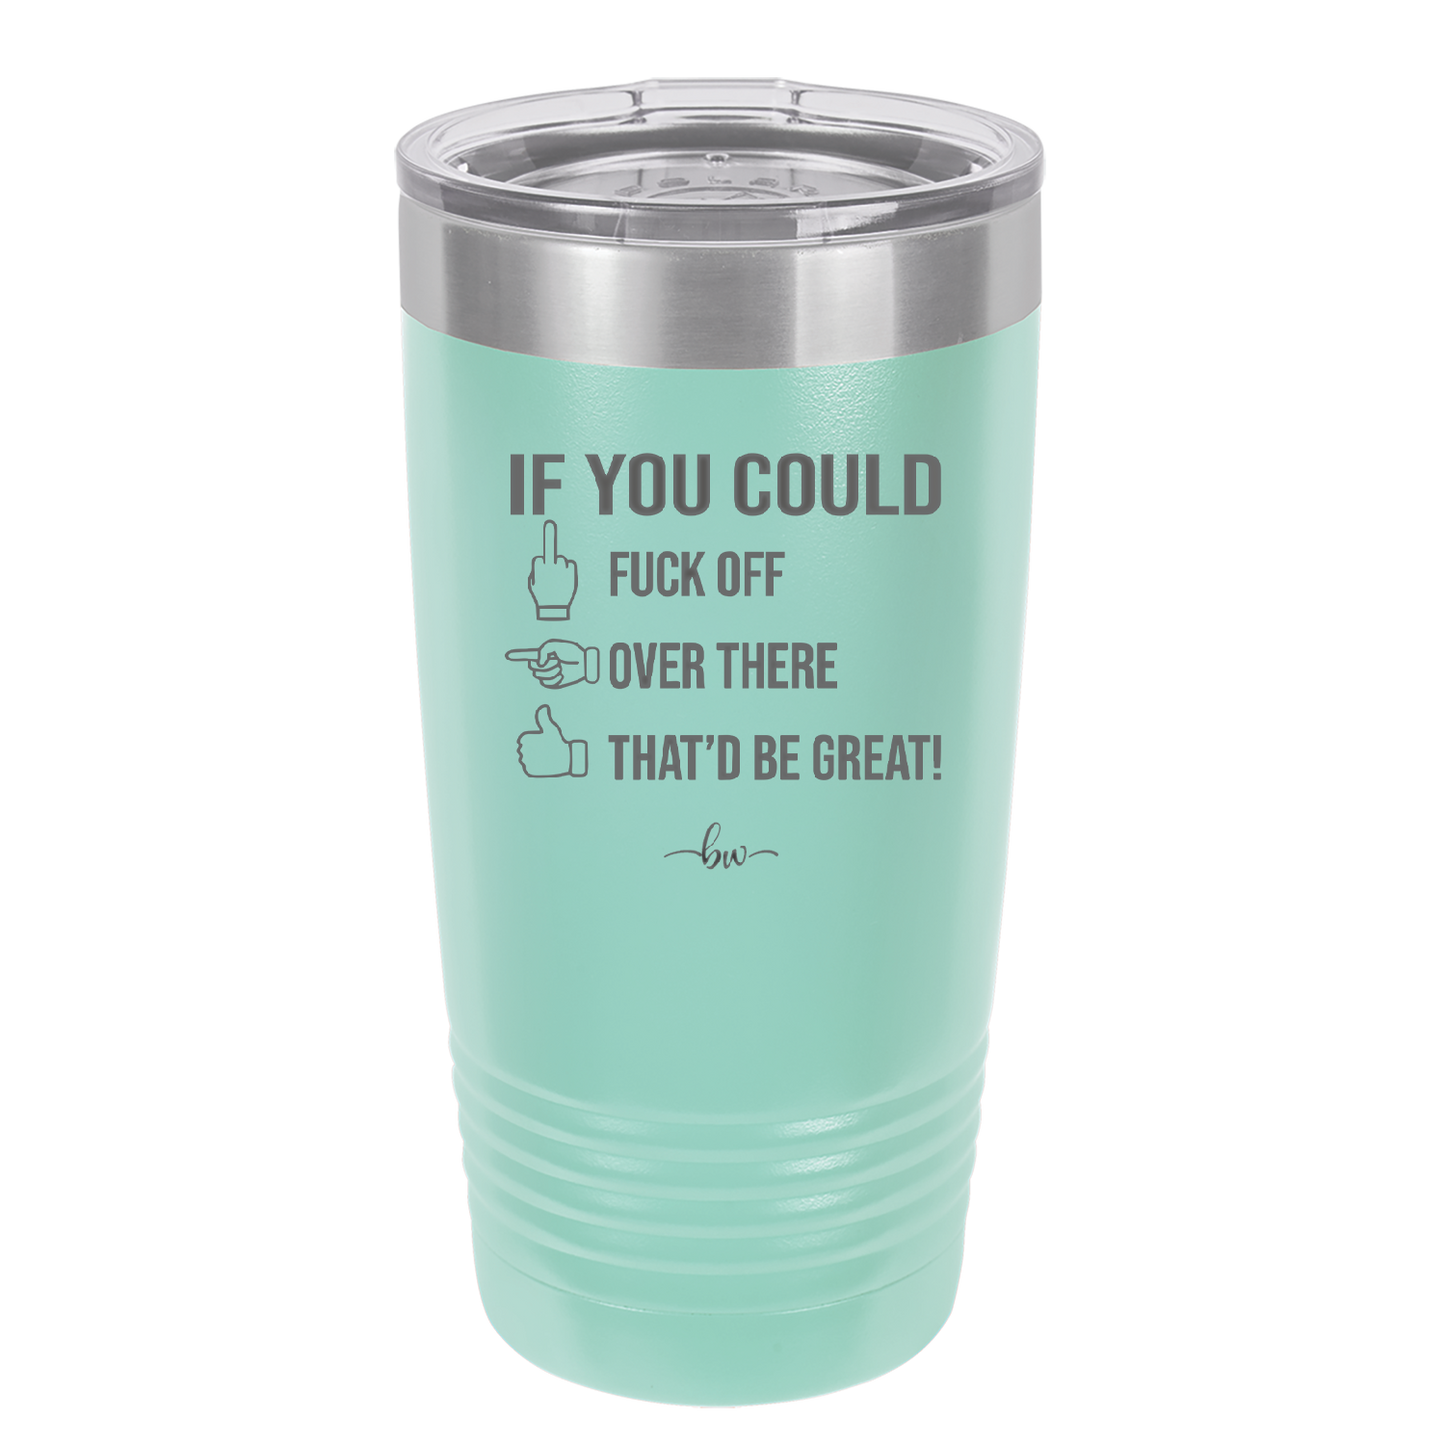 If You Could Fuck Off Over There That'd Be Great - Laser Engraved Stainless Steel Drinkware - 2296 -